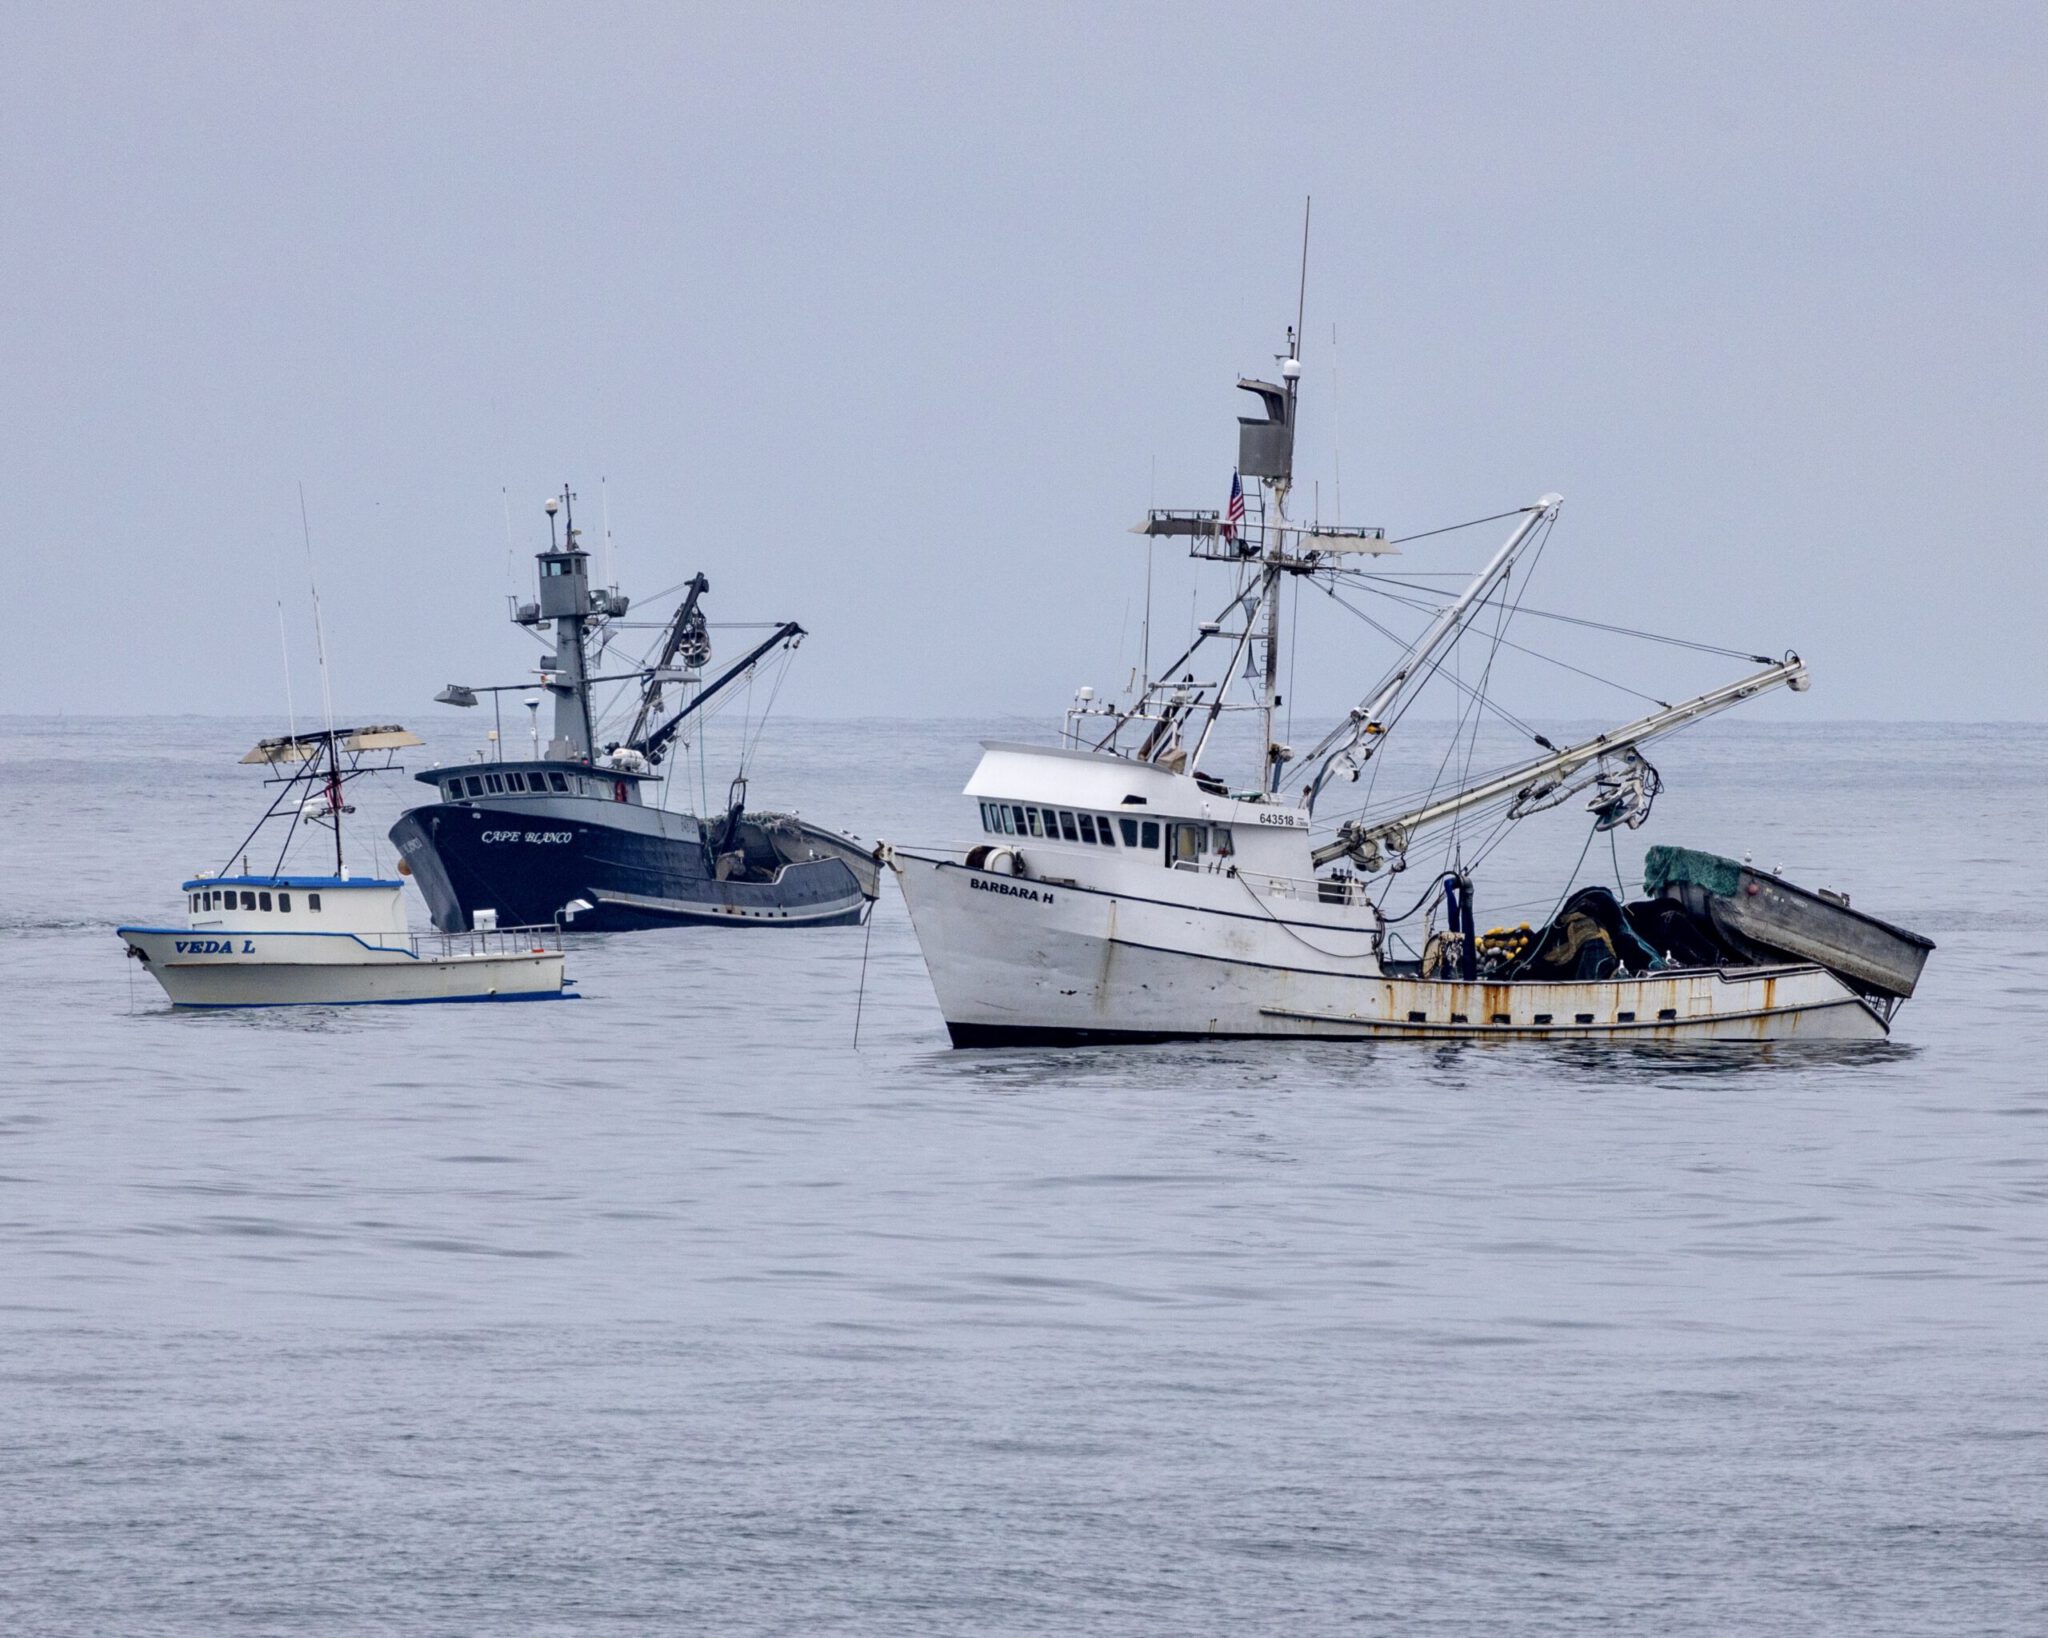 three commercial fishing boats fishing in La Jolla on a cloudy day in calm waters